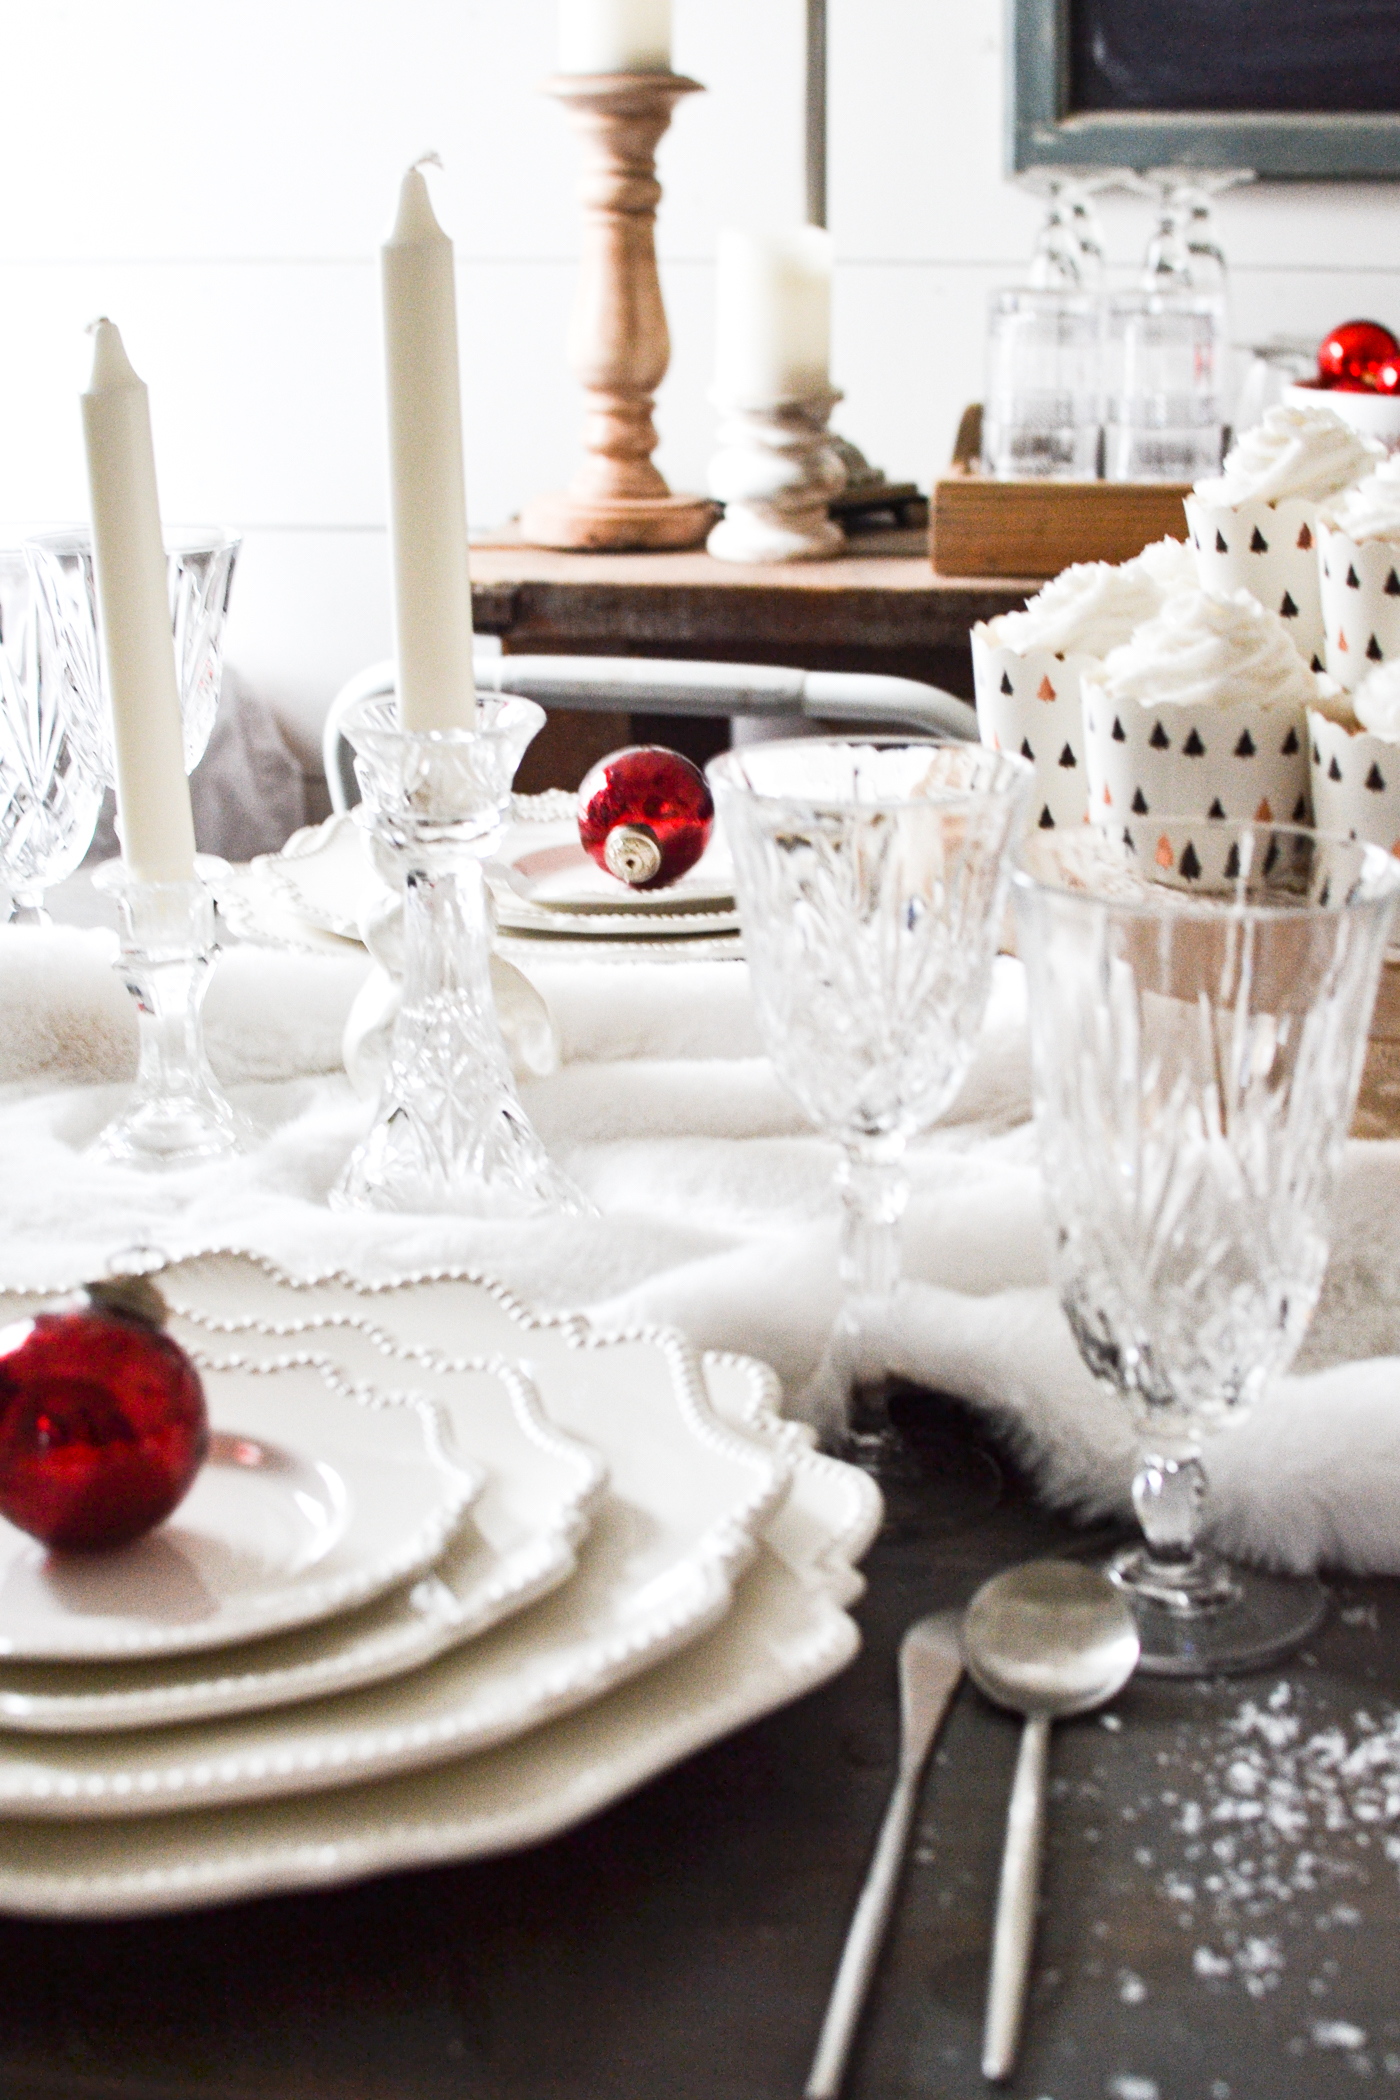 All-White Thrifty Tablescape for Under $20